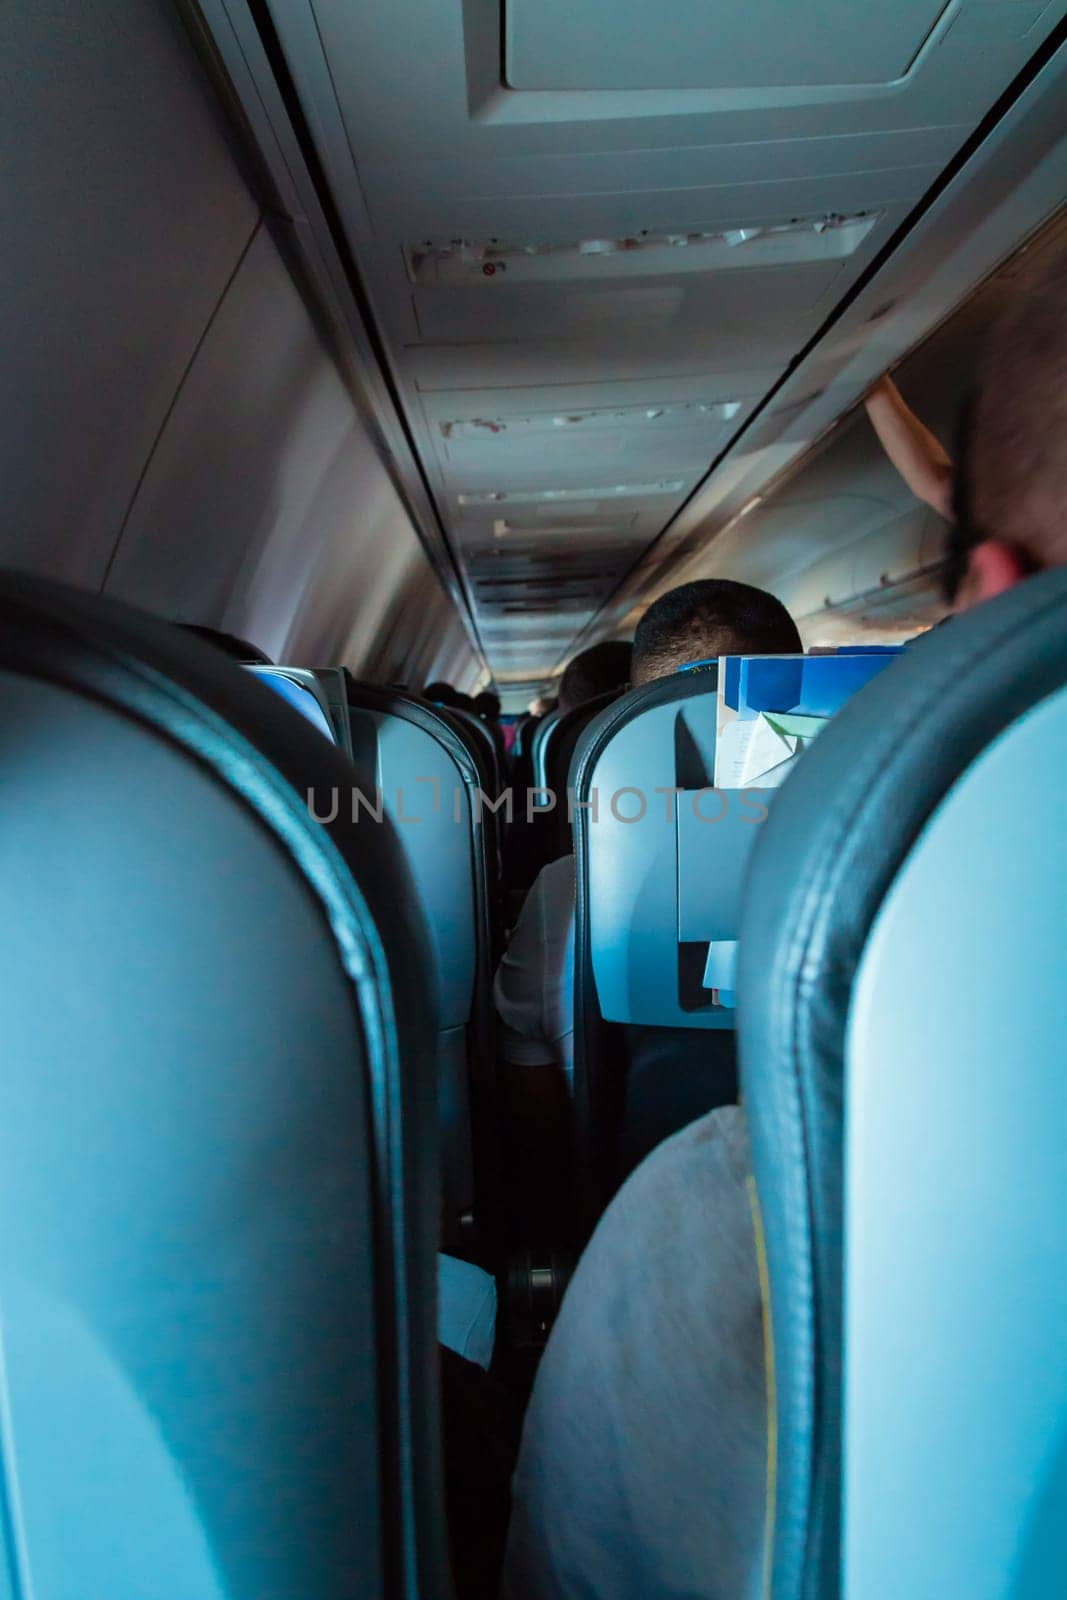 Interior of passenger airplane with people on seats.